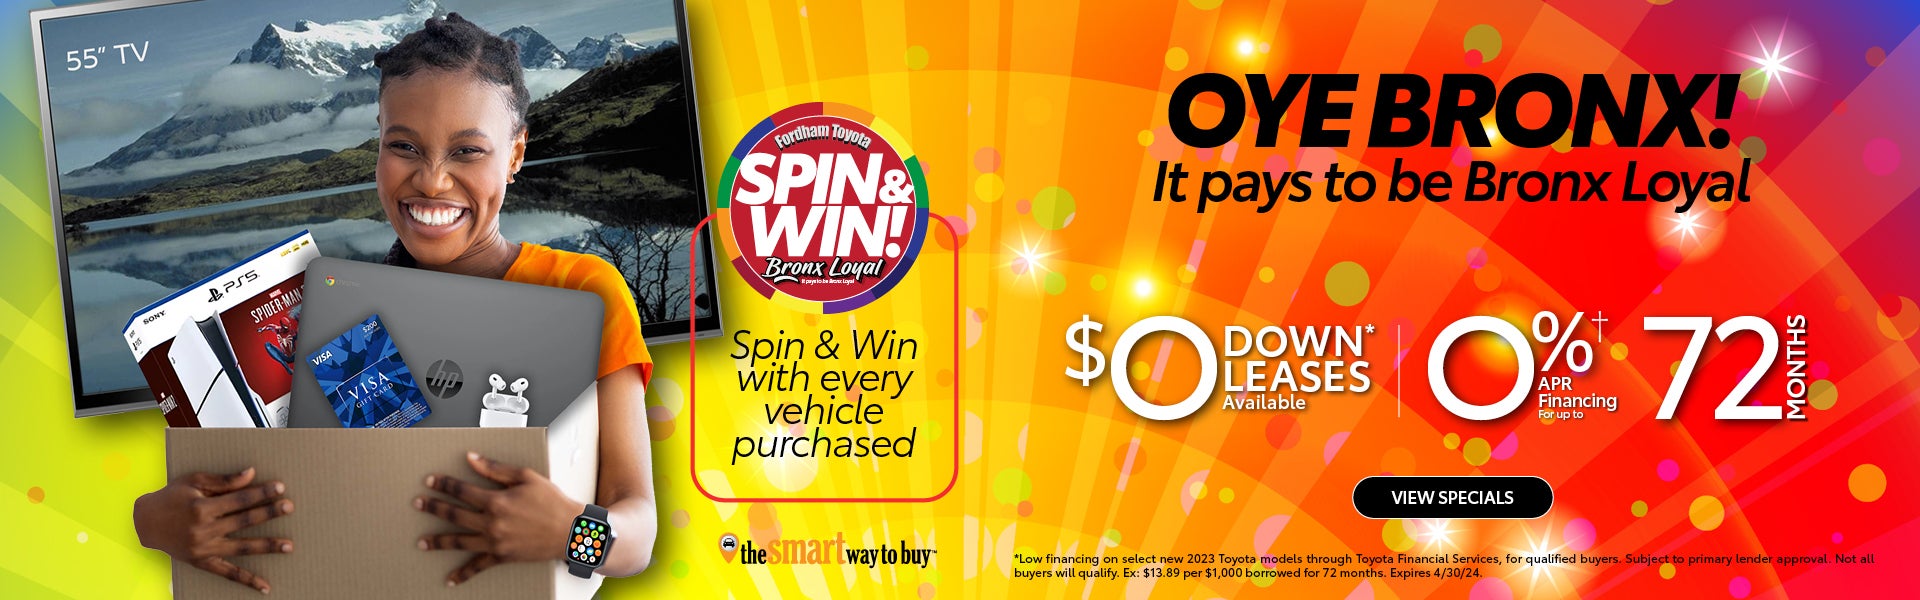 Spin & WIn